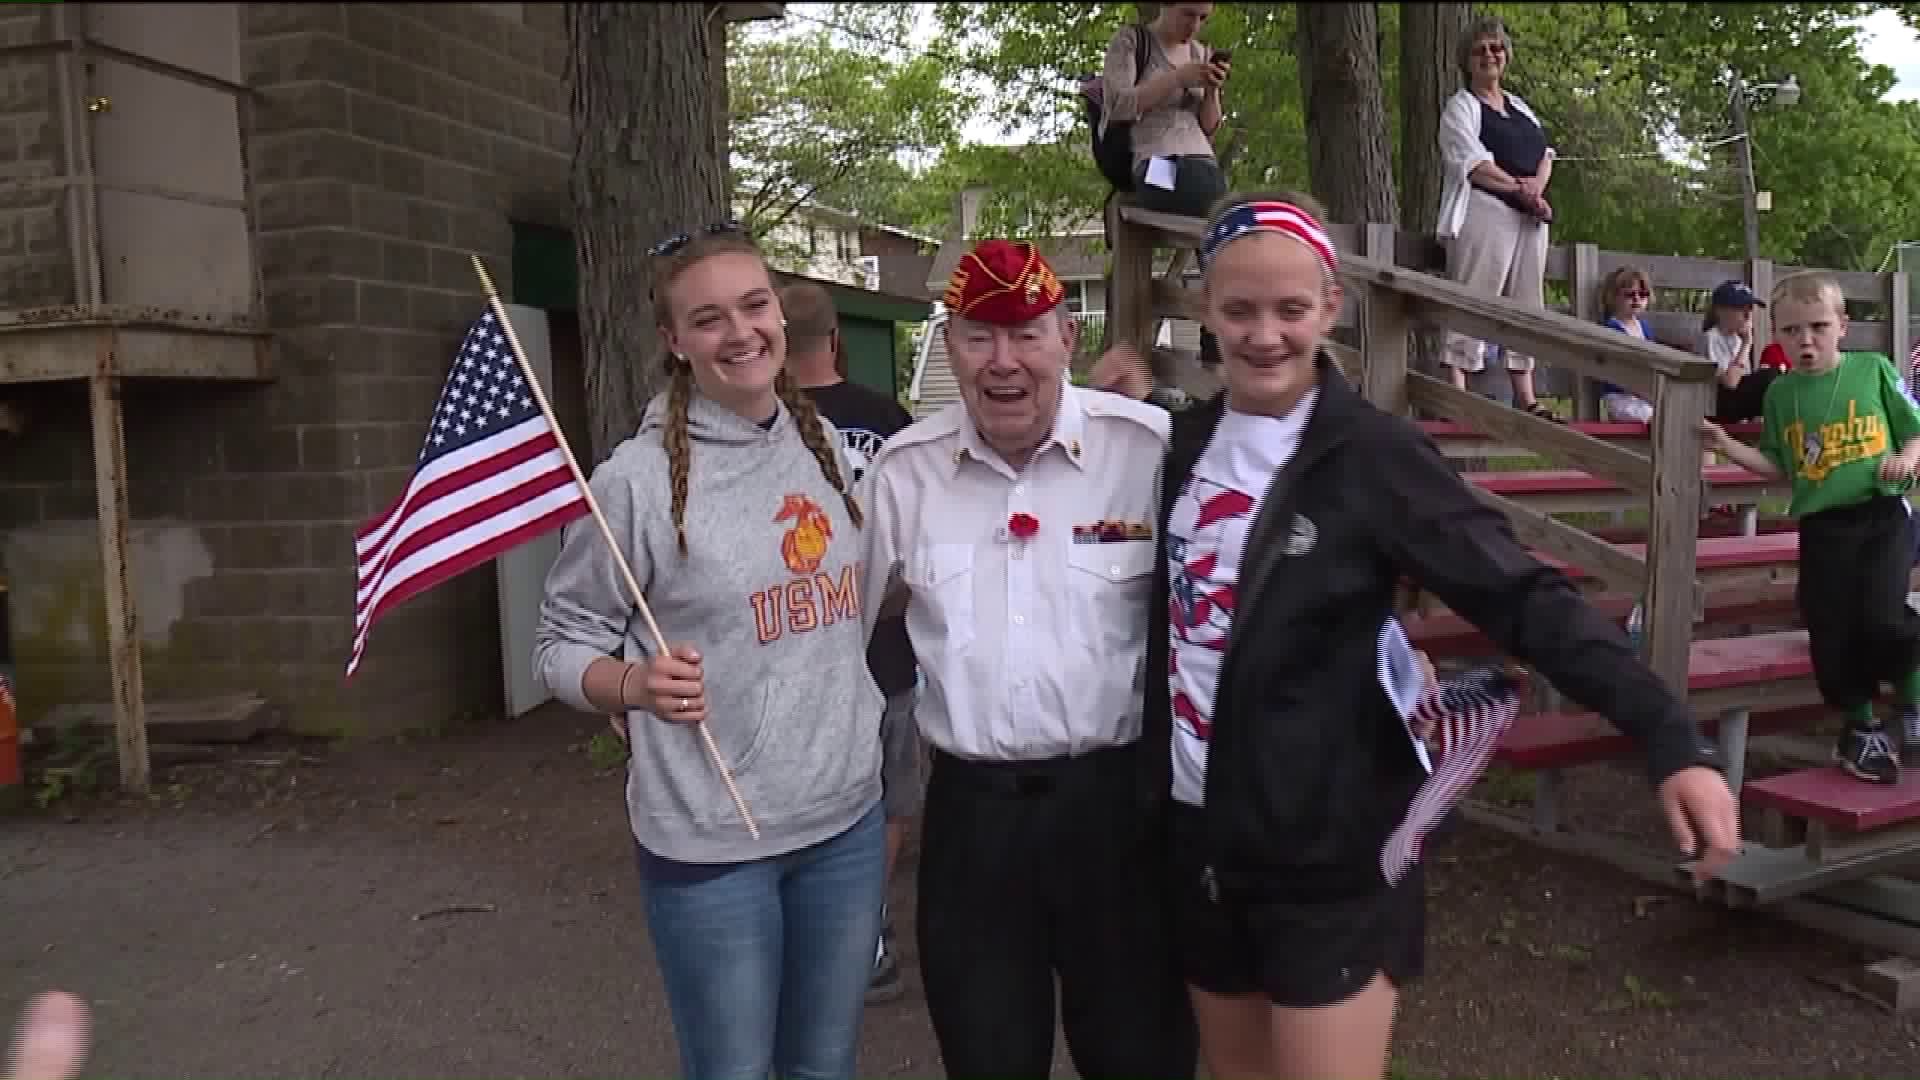 White Haven Welcomes Back Memorial Day Parade